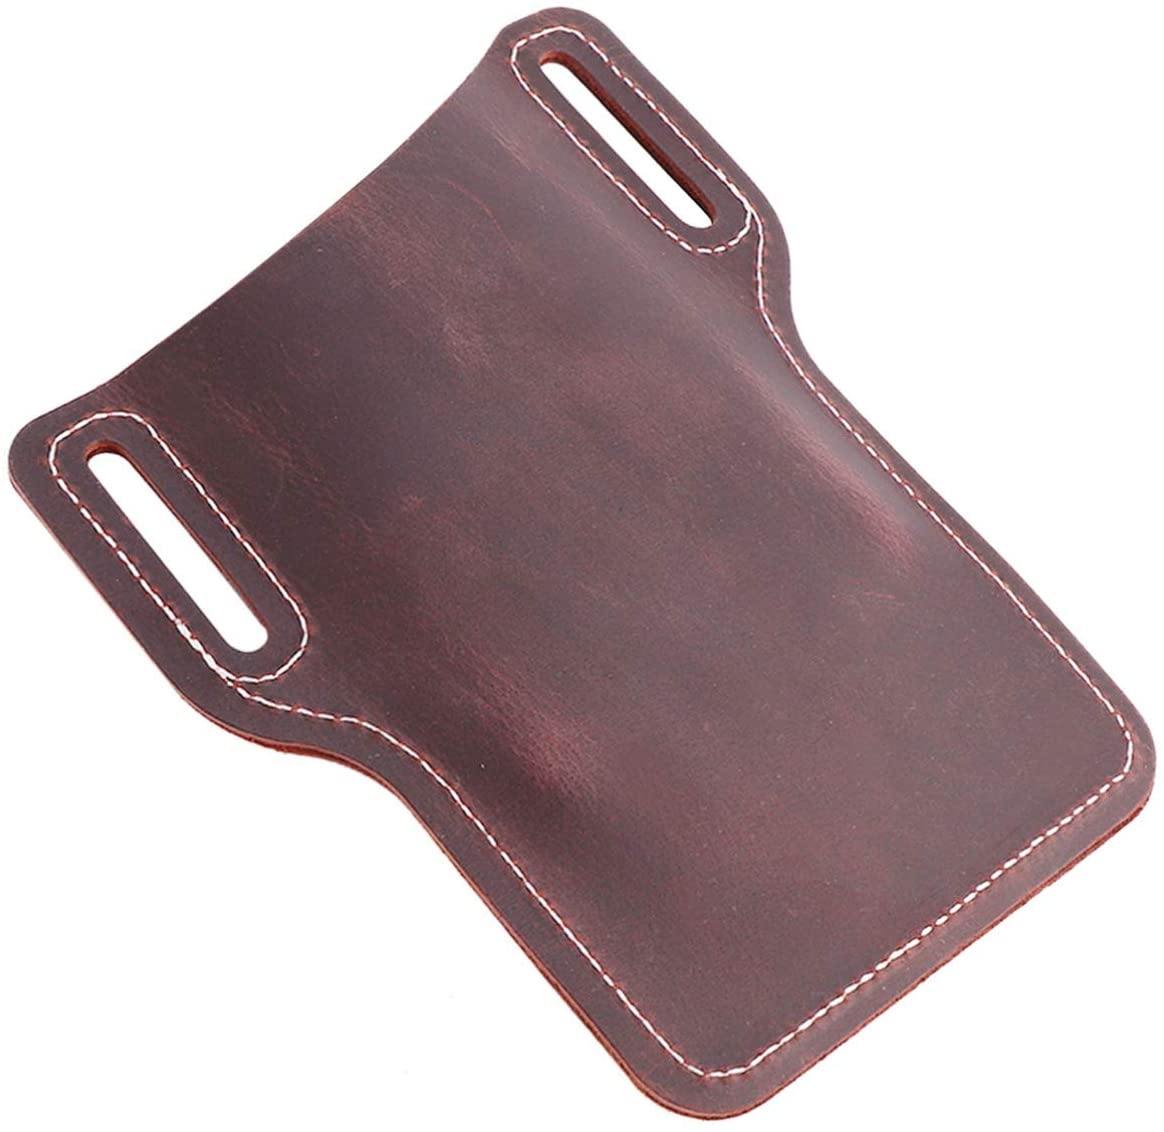 Phone Leather Case Belt Holster for Mobile Phone Protection iPhone Samsung EDC Sheath Pouch Men Handmade Leather Waist Dark Brown - Silipac